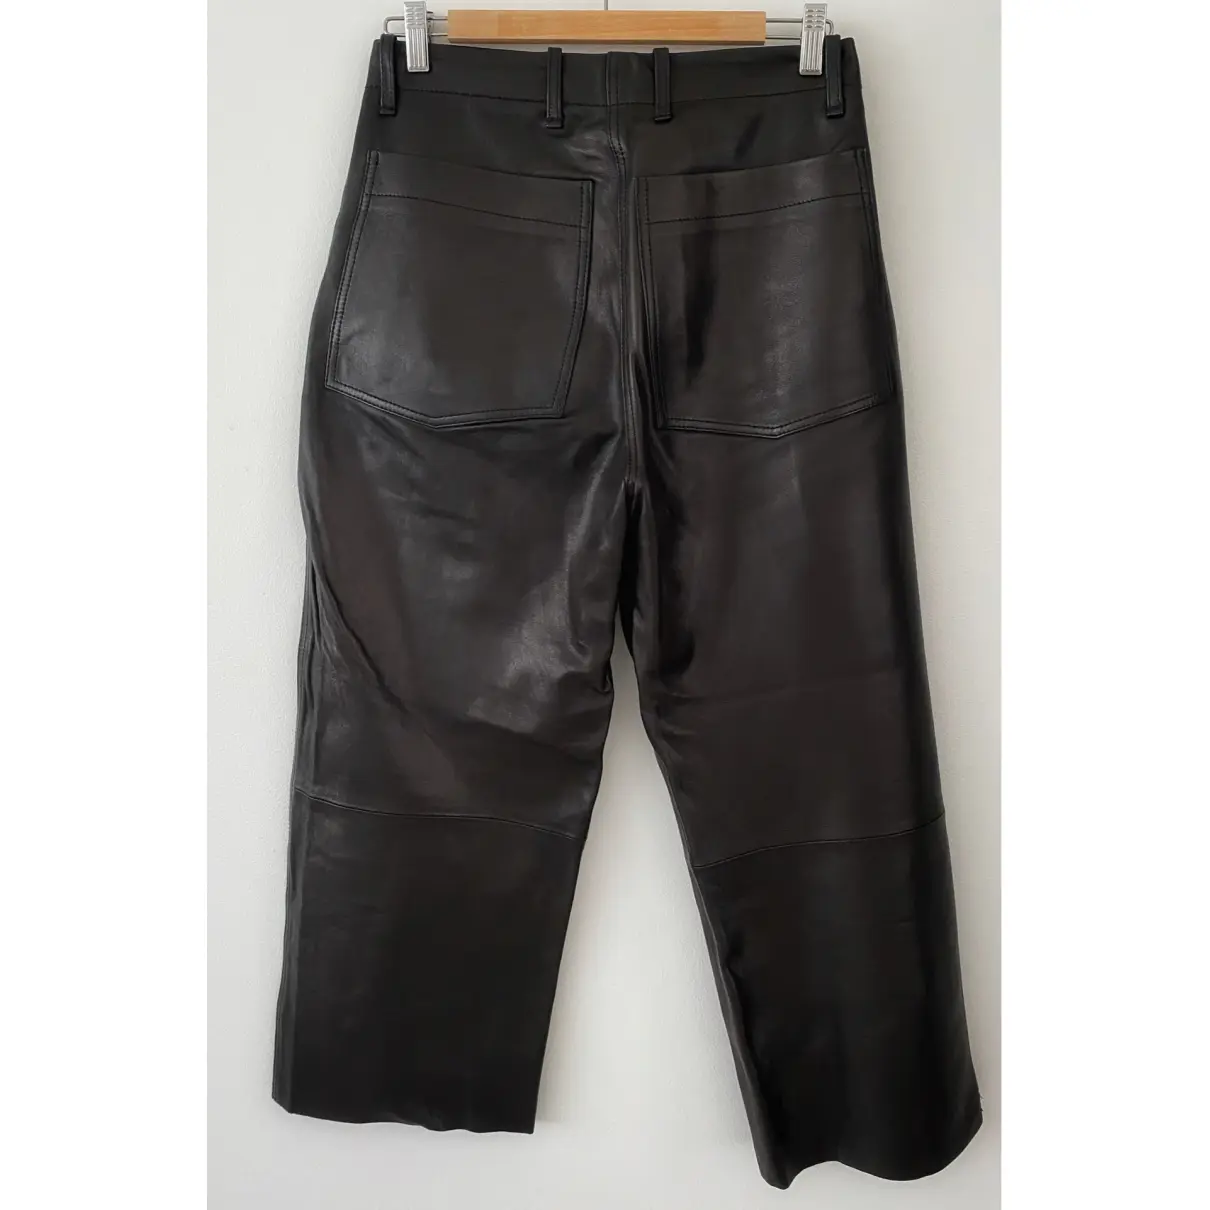 Buy Arket Leather trousers online